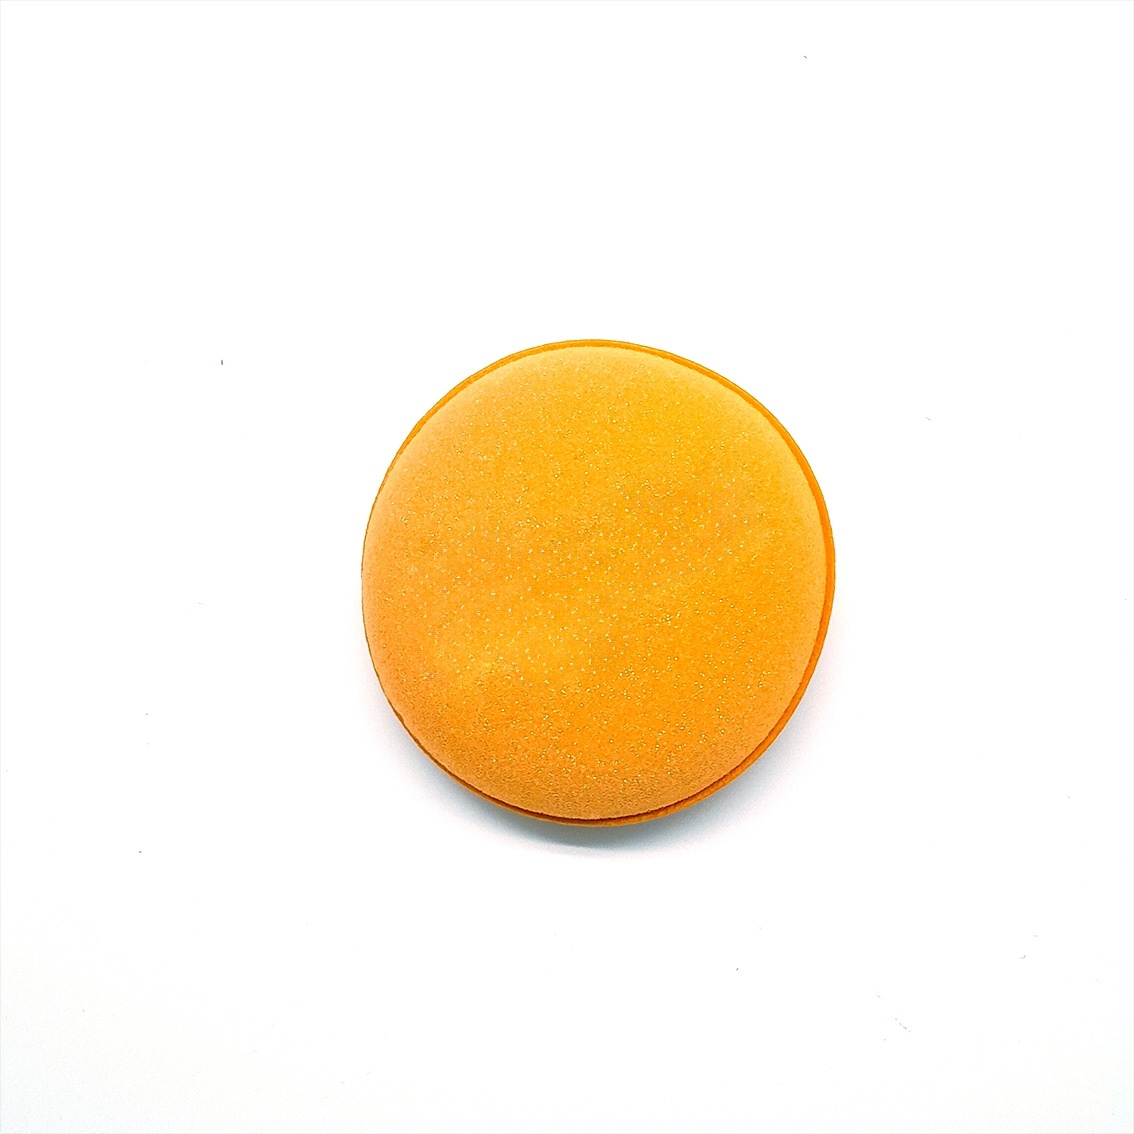 Applicator Pads (2 pieces) for waxing